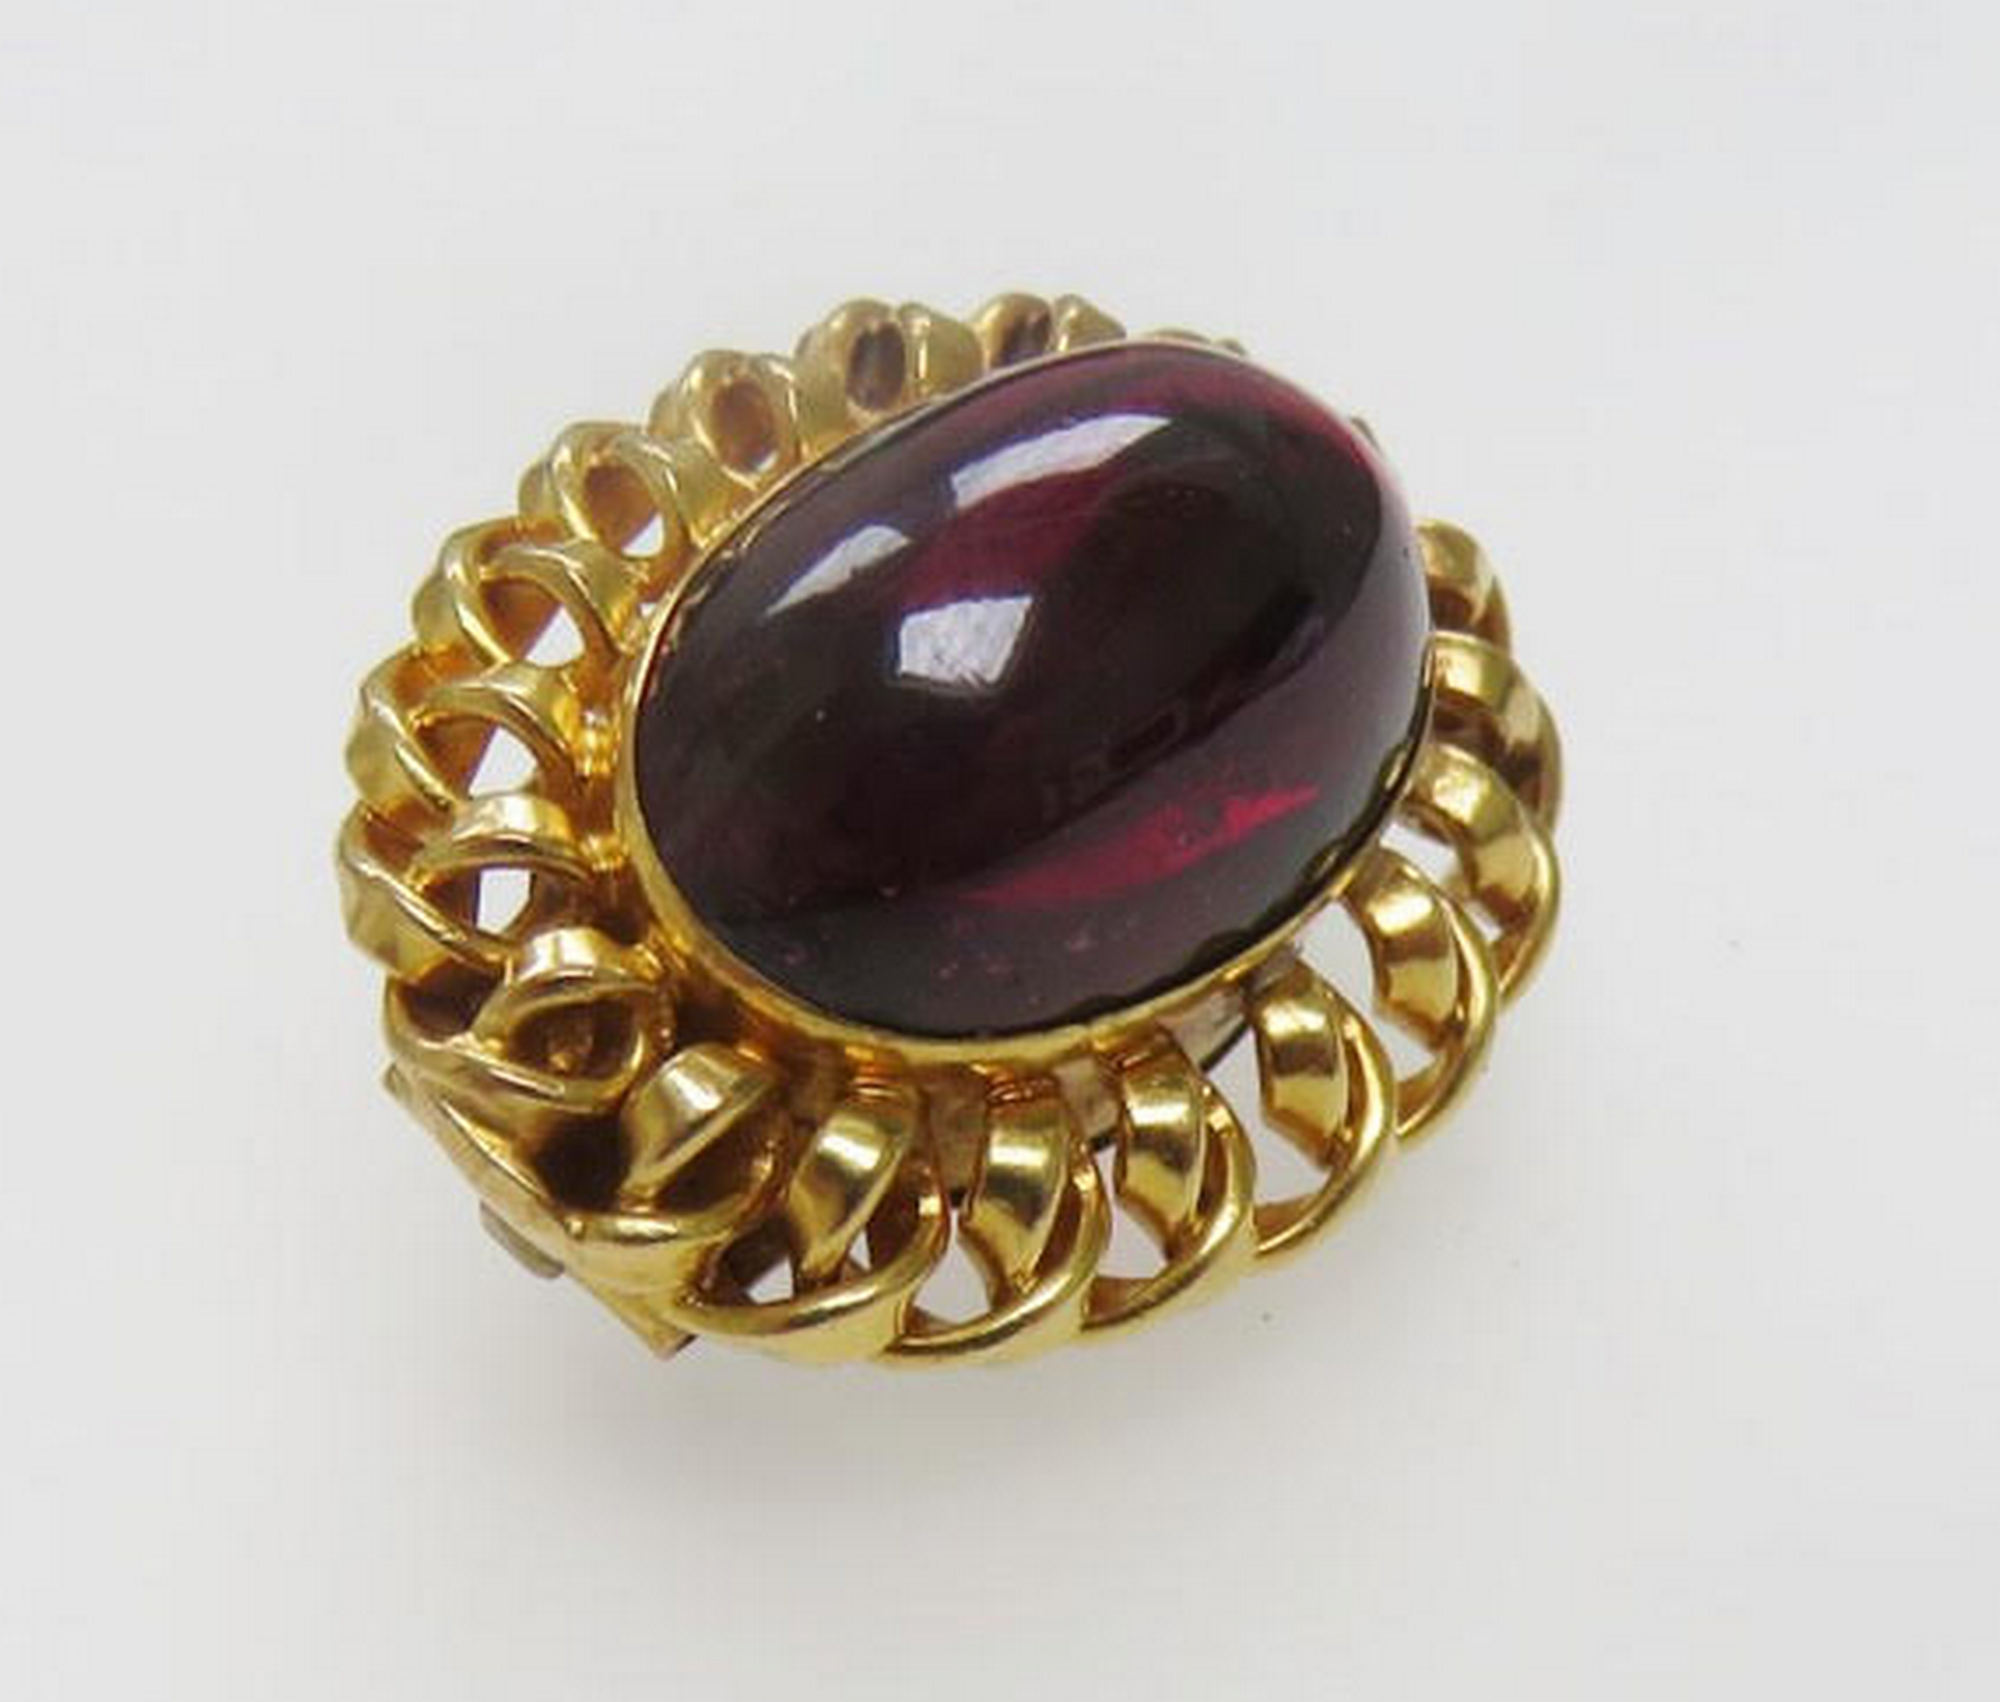 Victorian yellow metal and garnet brooch (tests as 18ct)-secret compartment at back of brooch. - Image 5 of 5